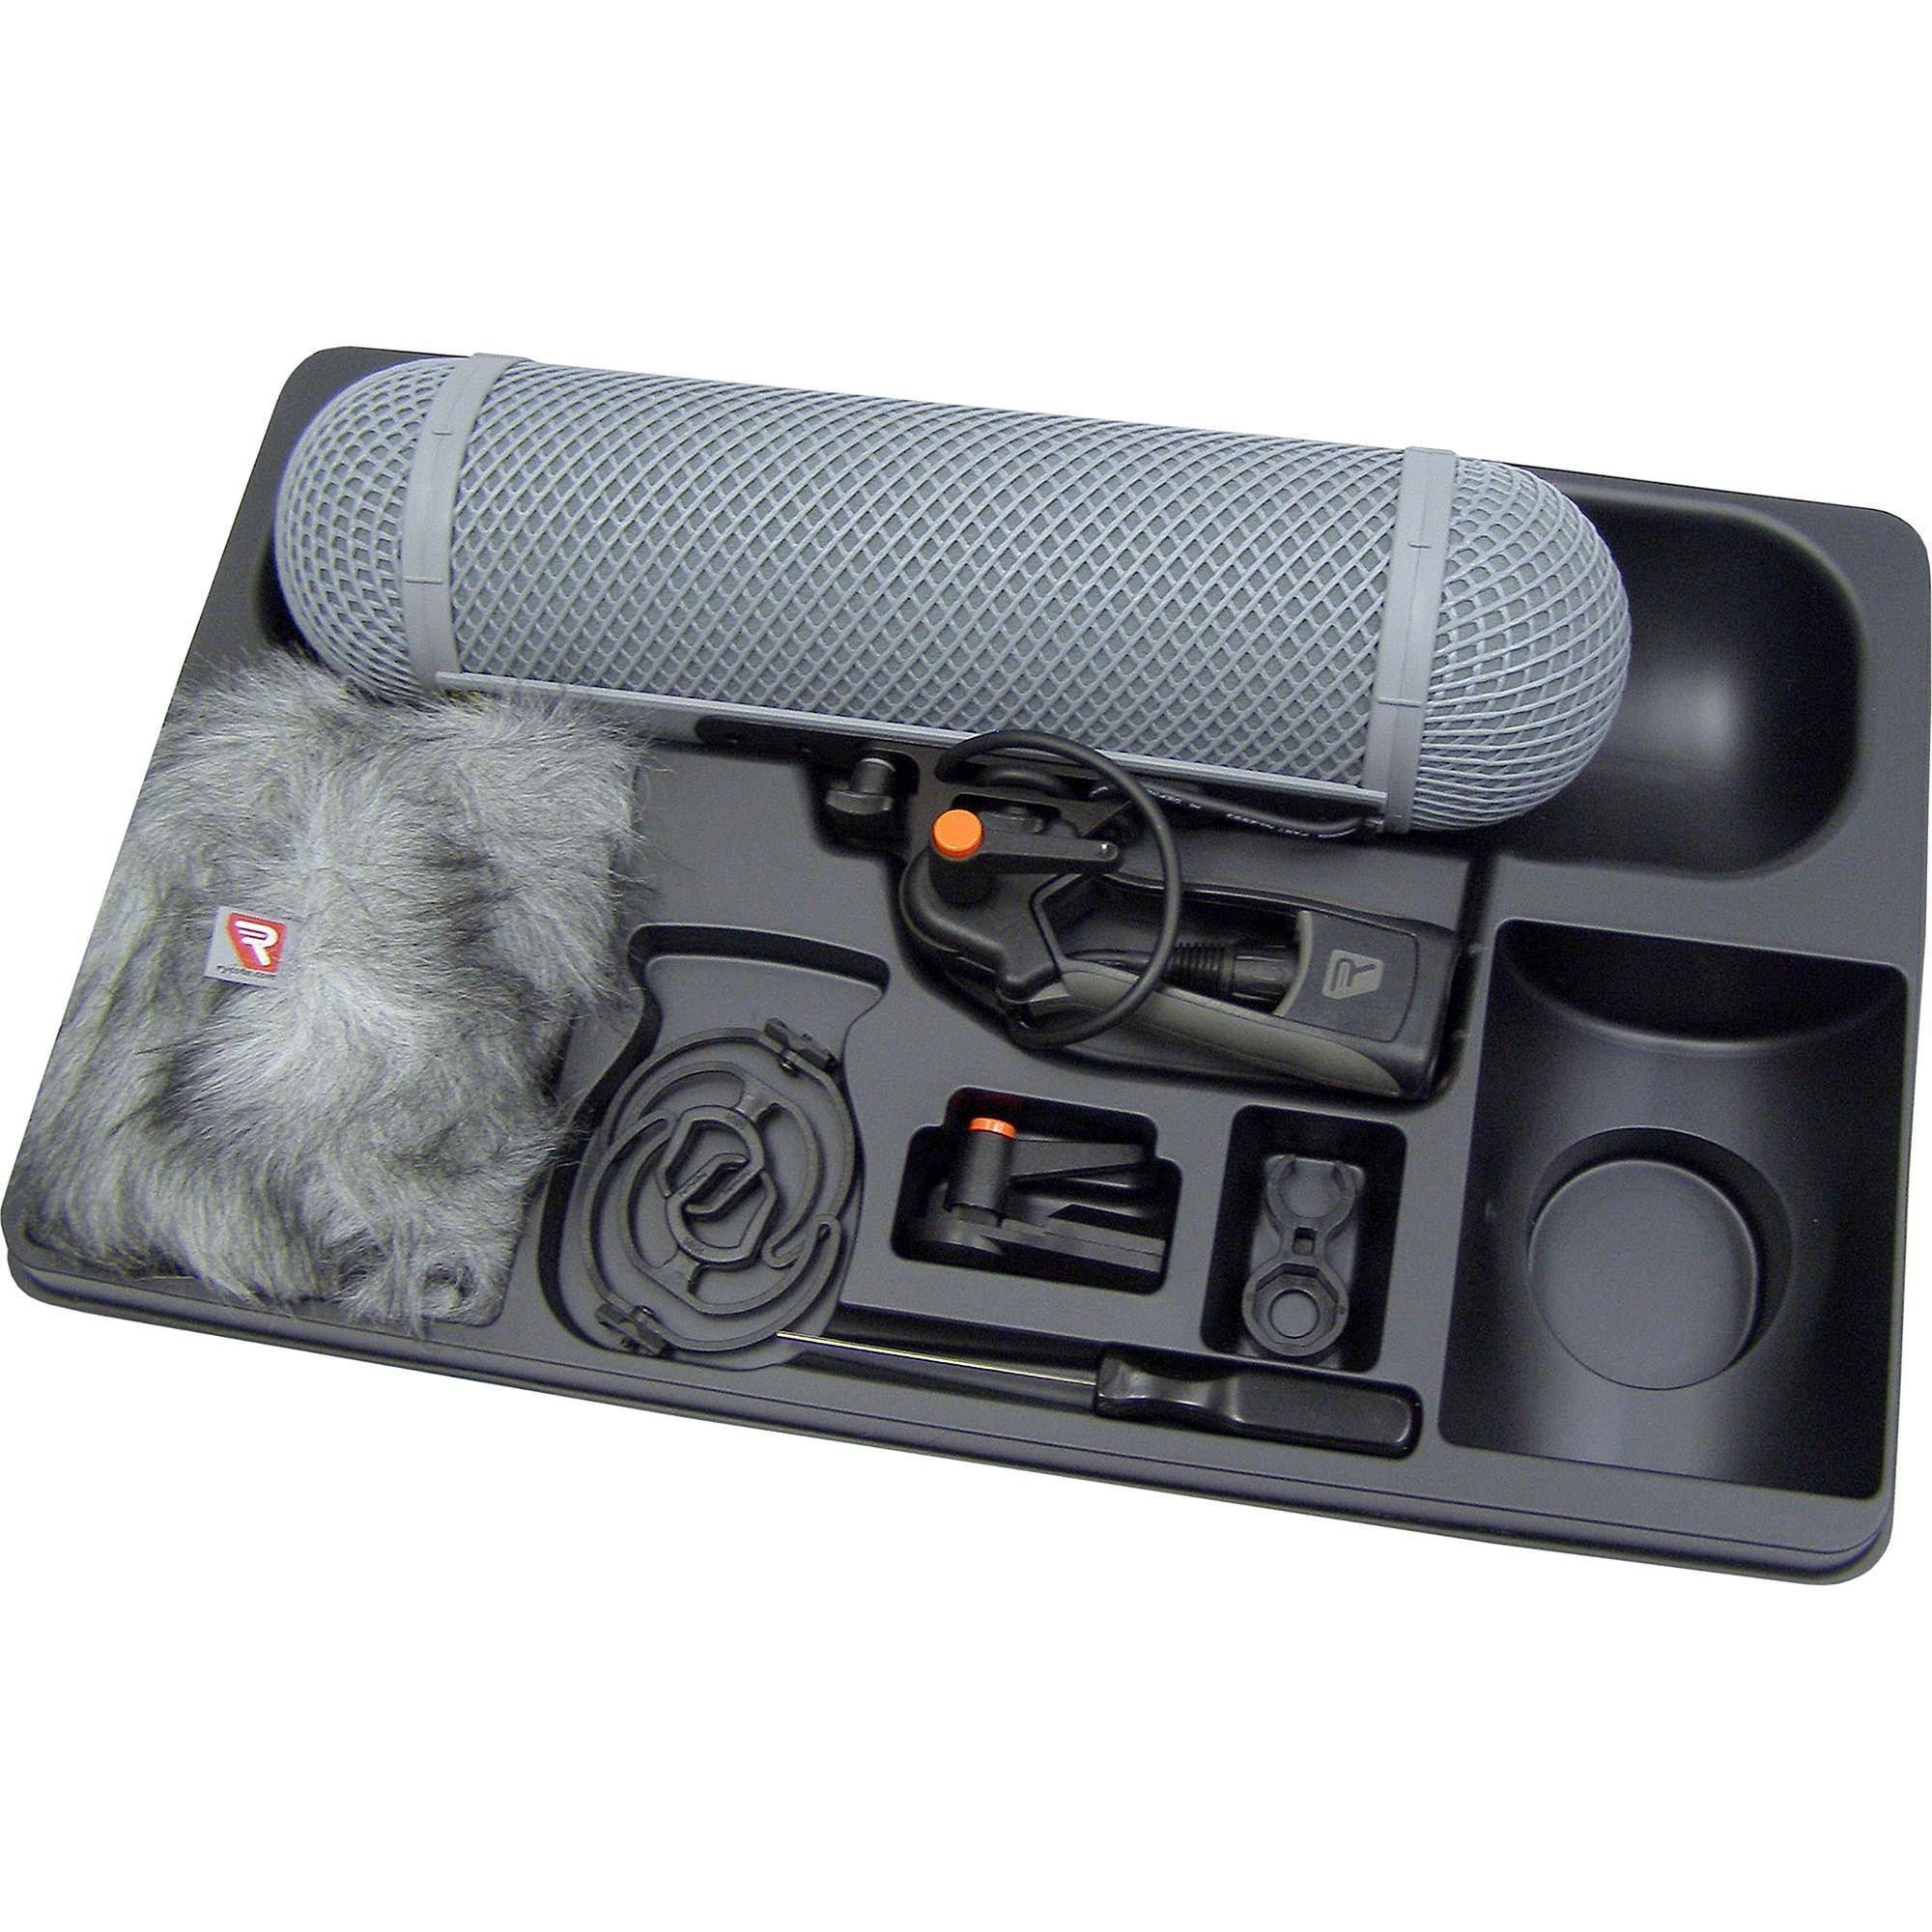 Rycote Windshield Kit 3 - Complete Windshield and Suspension System (161-210mm)